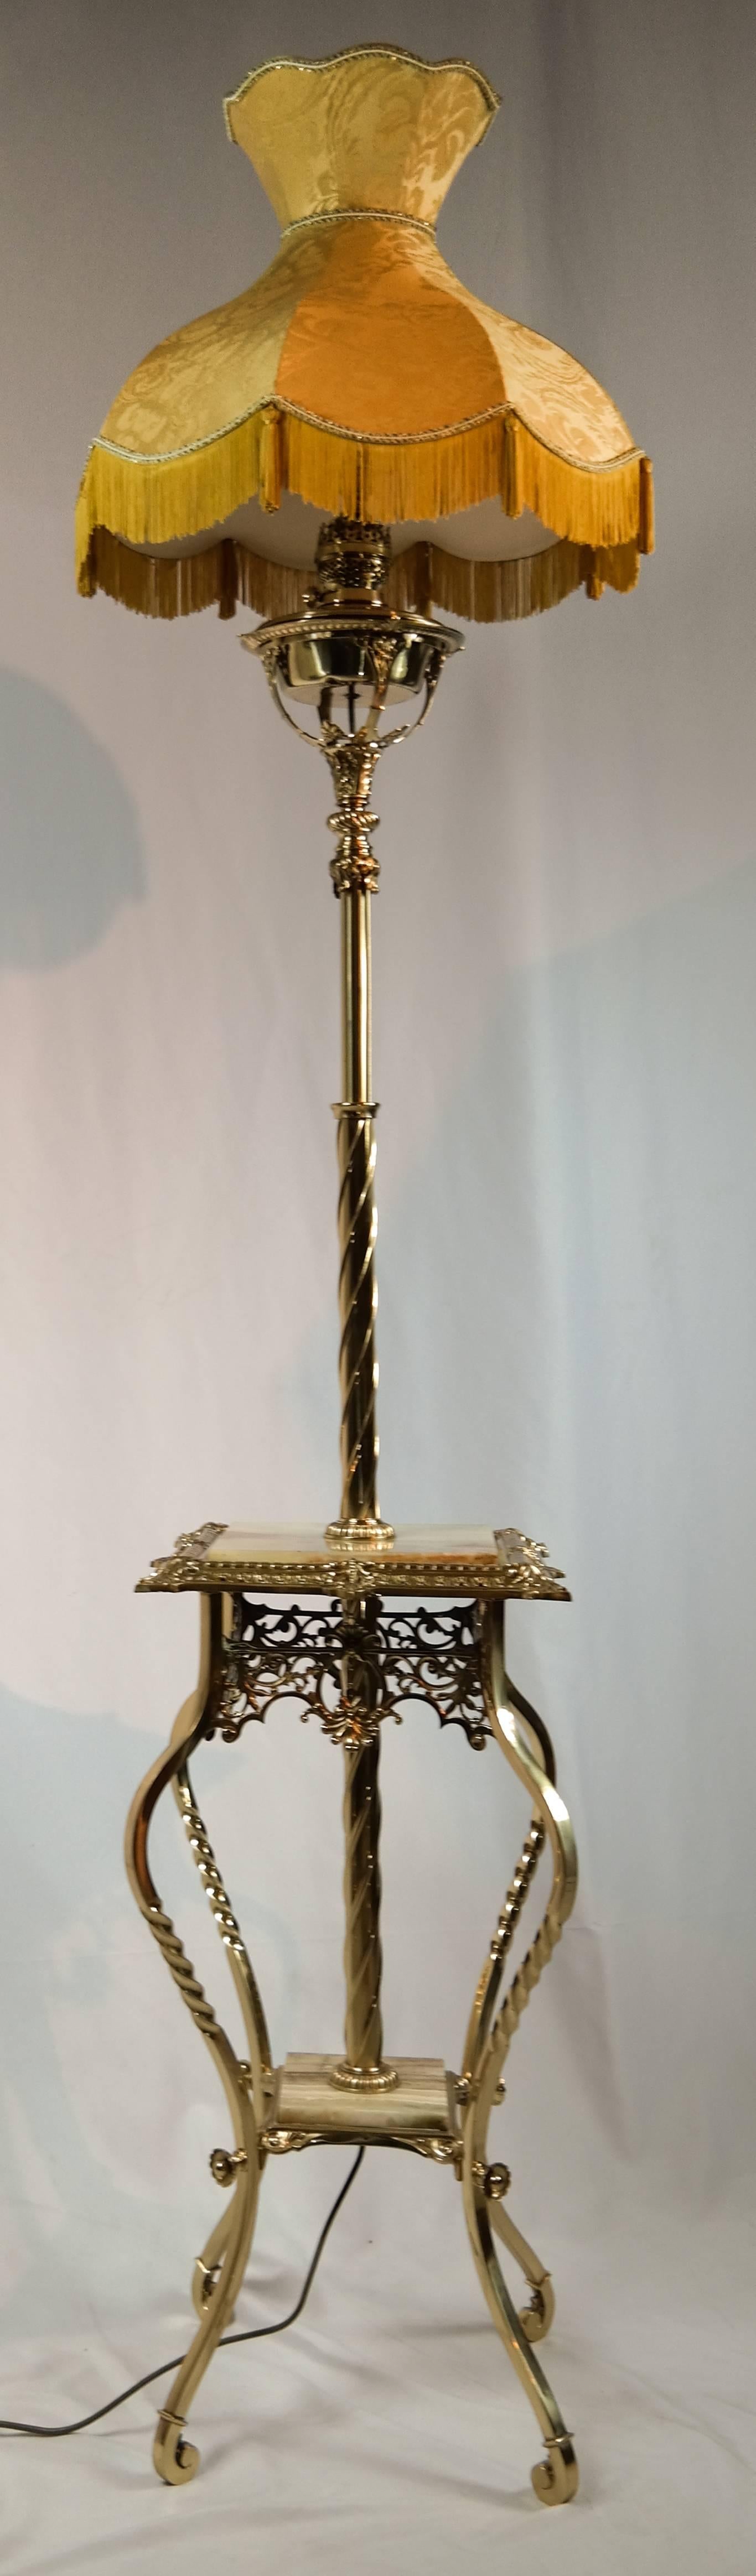 19th century brass floor lamp, converted from an oil lamp, with an onyx top. Superb condition, has been professionally cleaned.

Stand measures 84